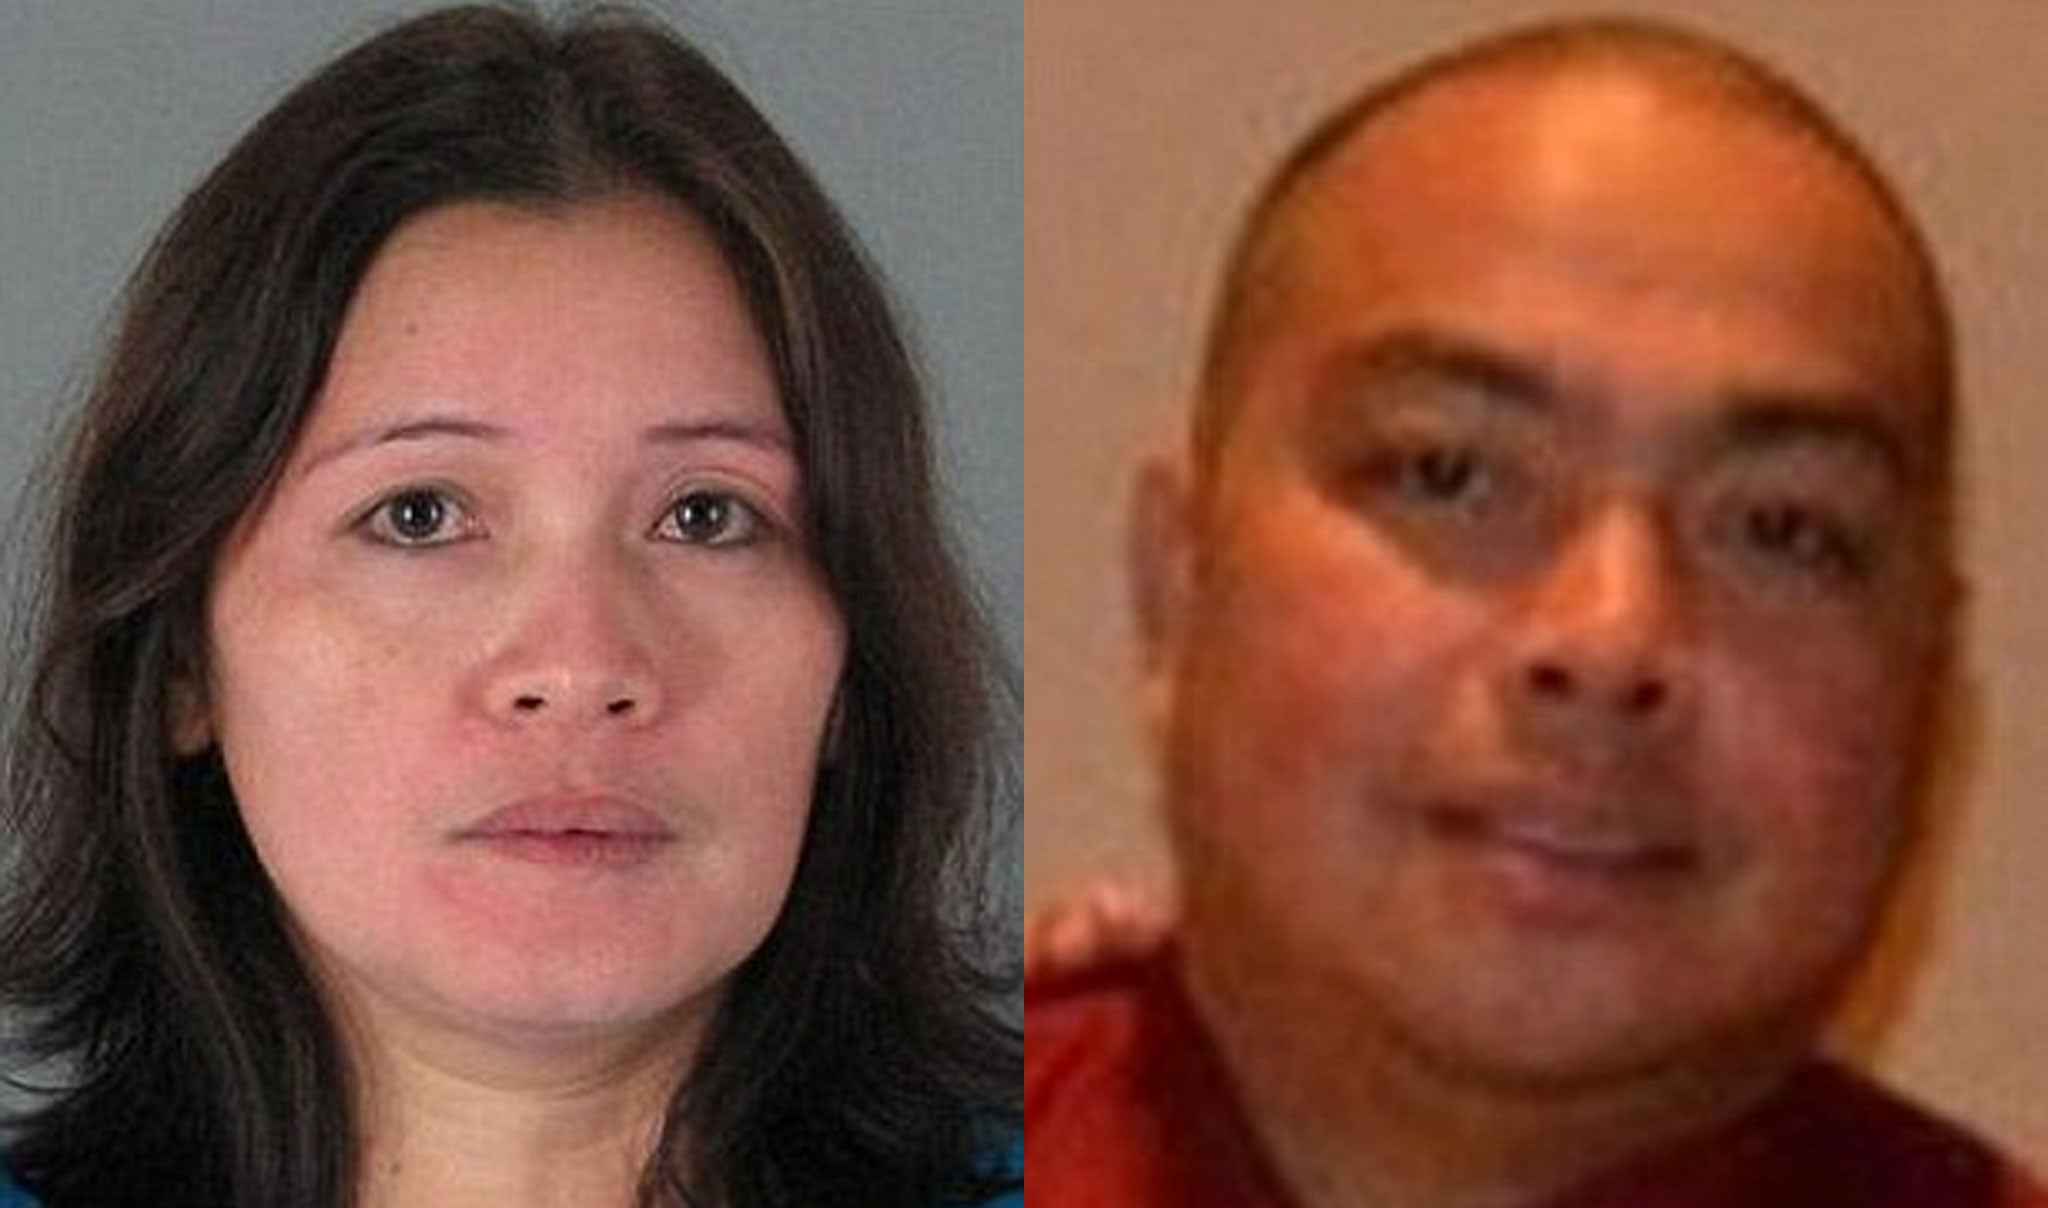 Jesusa Ursonal Tatad faces at least 16 years in prison after refusing to challenge allegations she murdered Ronnie Tatad